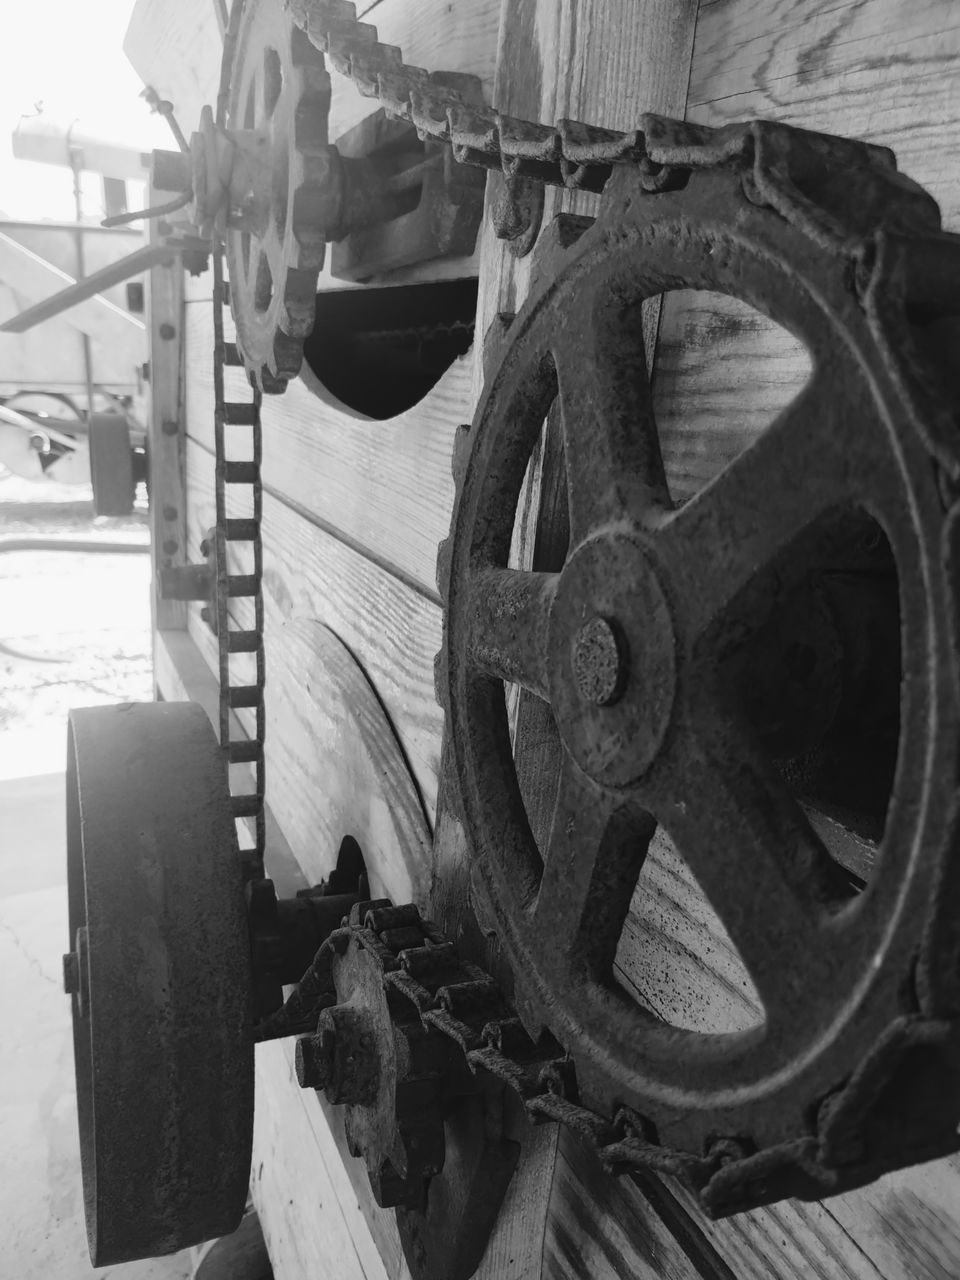 wheel, machinery, steam engine, transportation, no people, aircraft engine, black and white, metal, industry, machine part, day, vehicle, equipment, iron, monochrome, gear